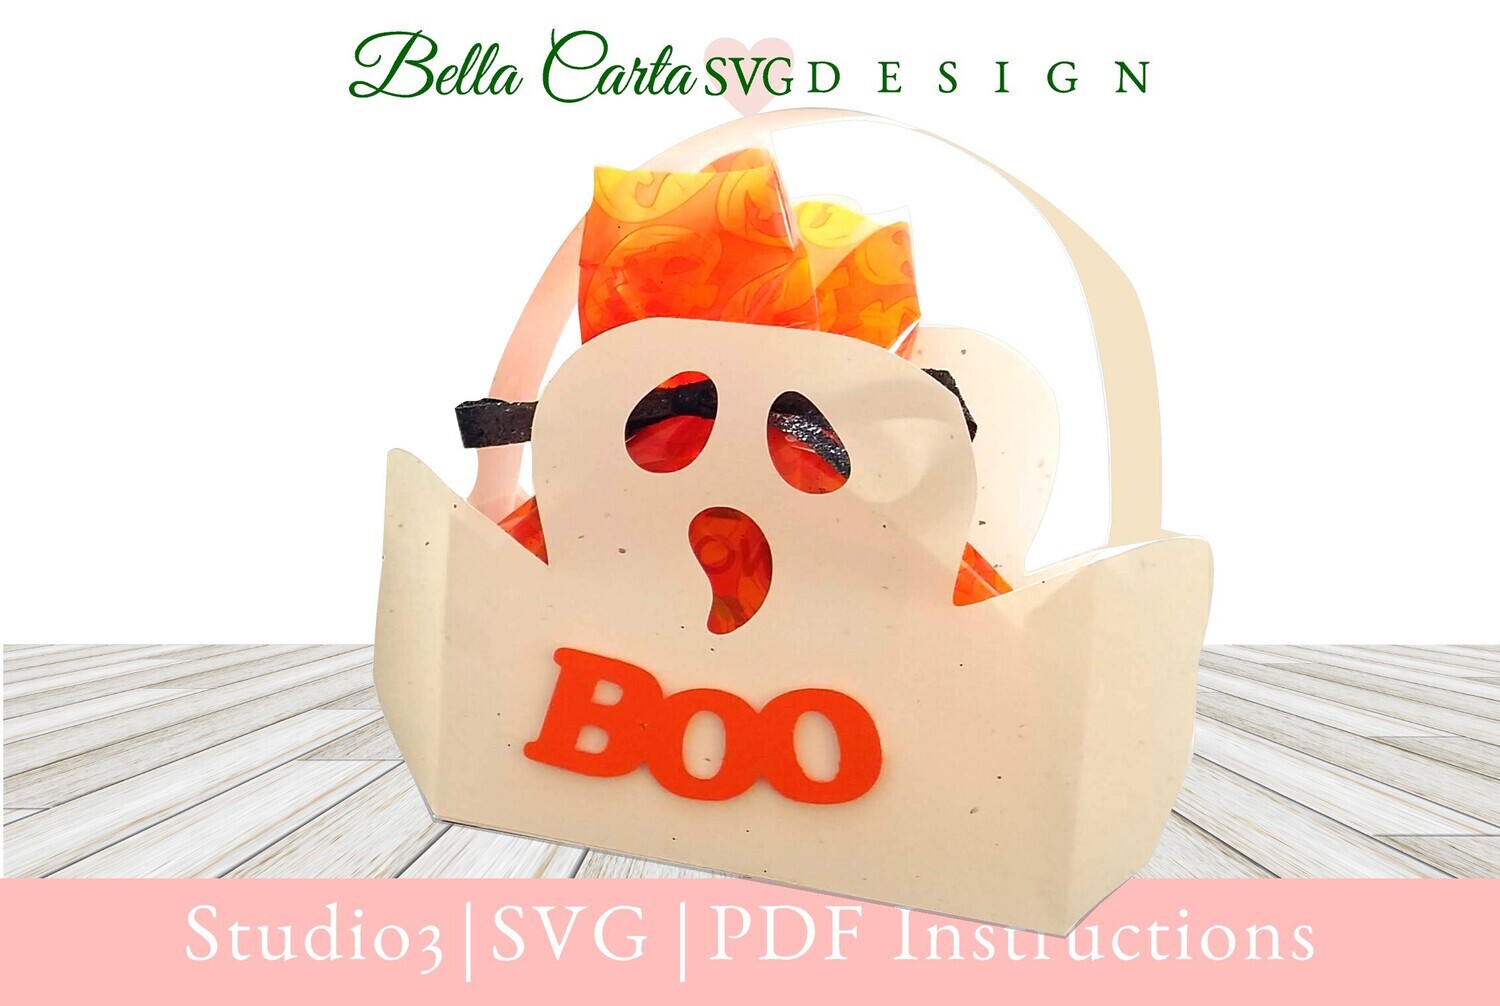 Halloween treat basket in the shape of a spooky white ghost made with a 3D SVG file from Bella Carta Design and a Cricut.